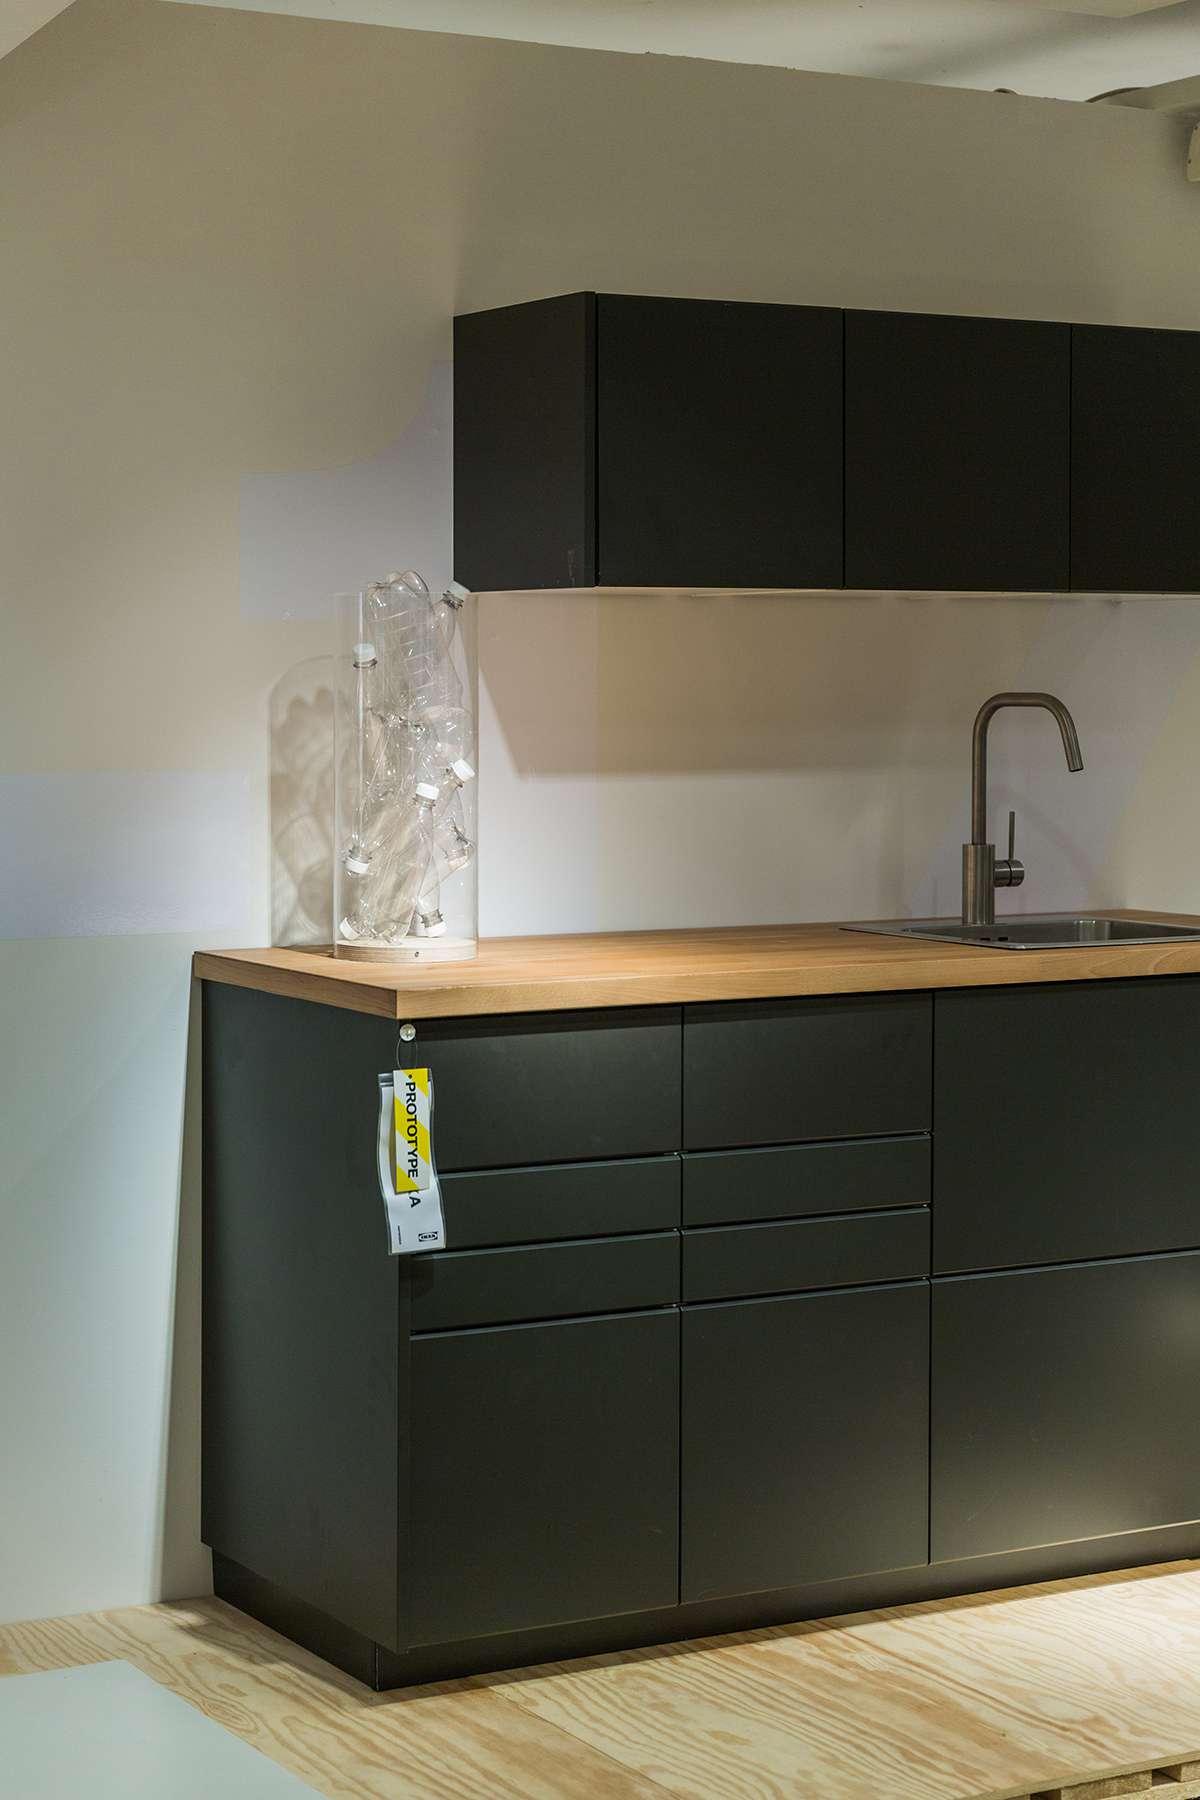 Ikea Is Turning Recycled Bottles Into Kitchen Cabinets Real Simple